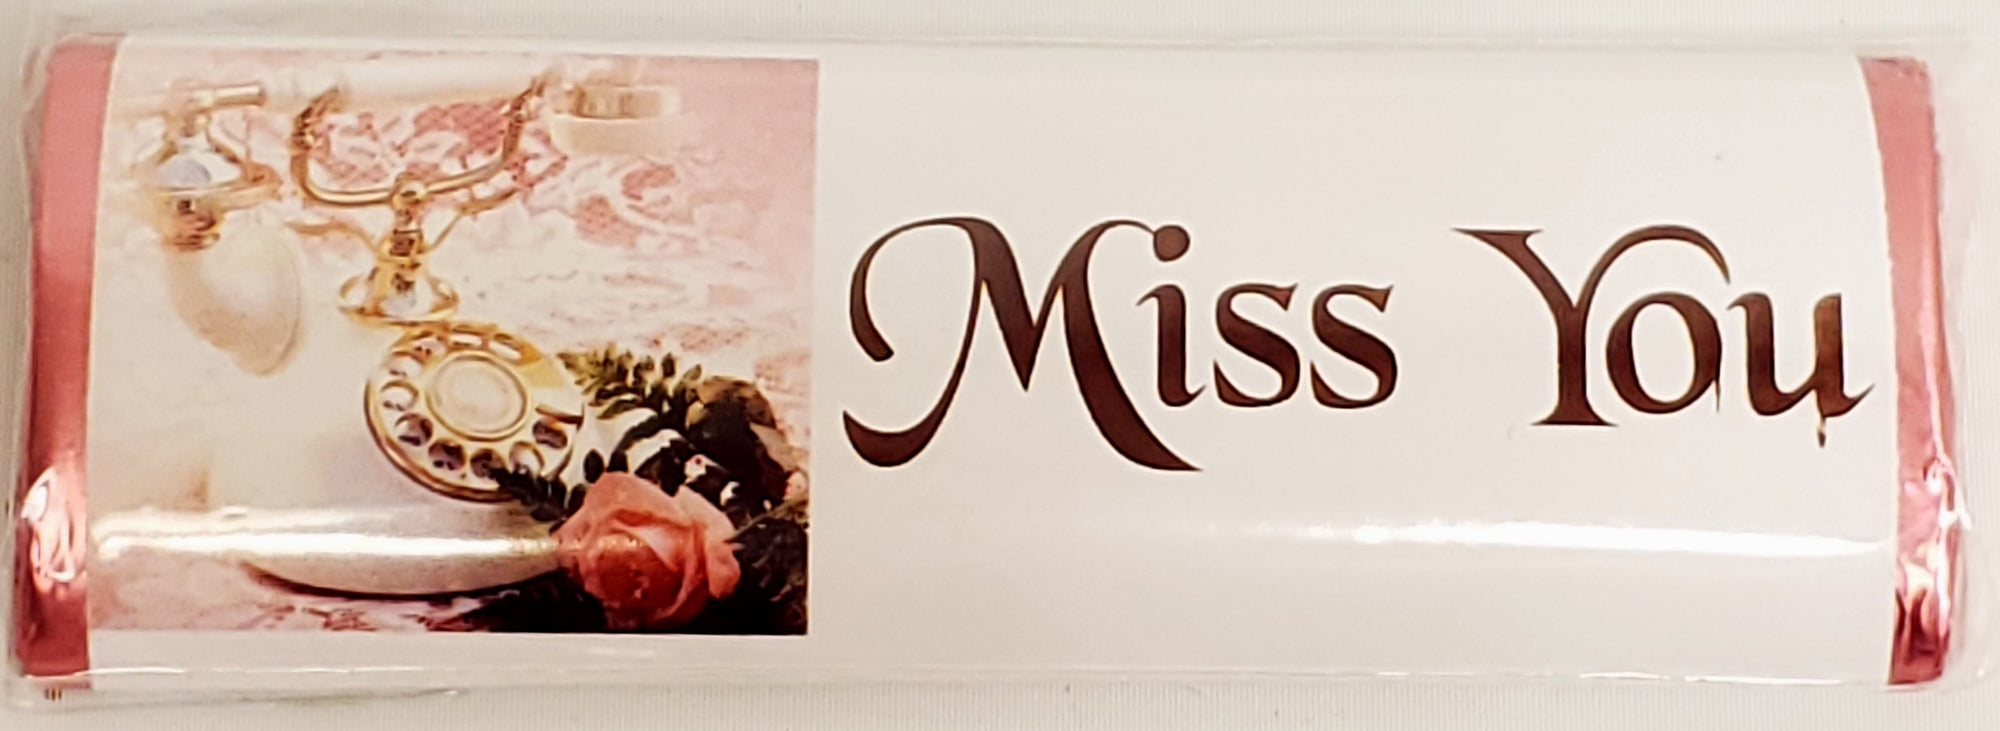 Miss You Chocolate Message